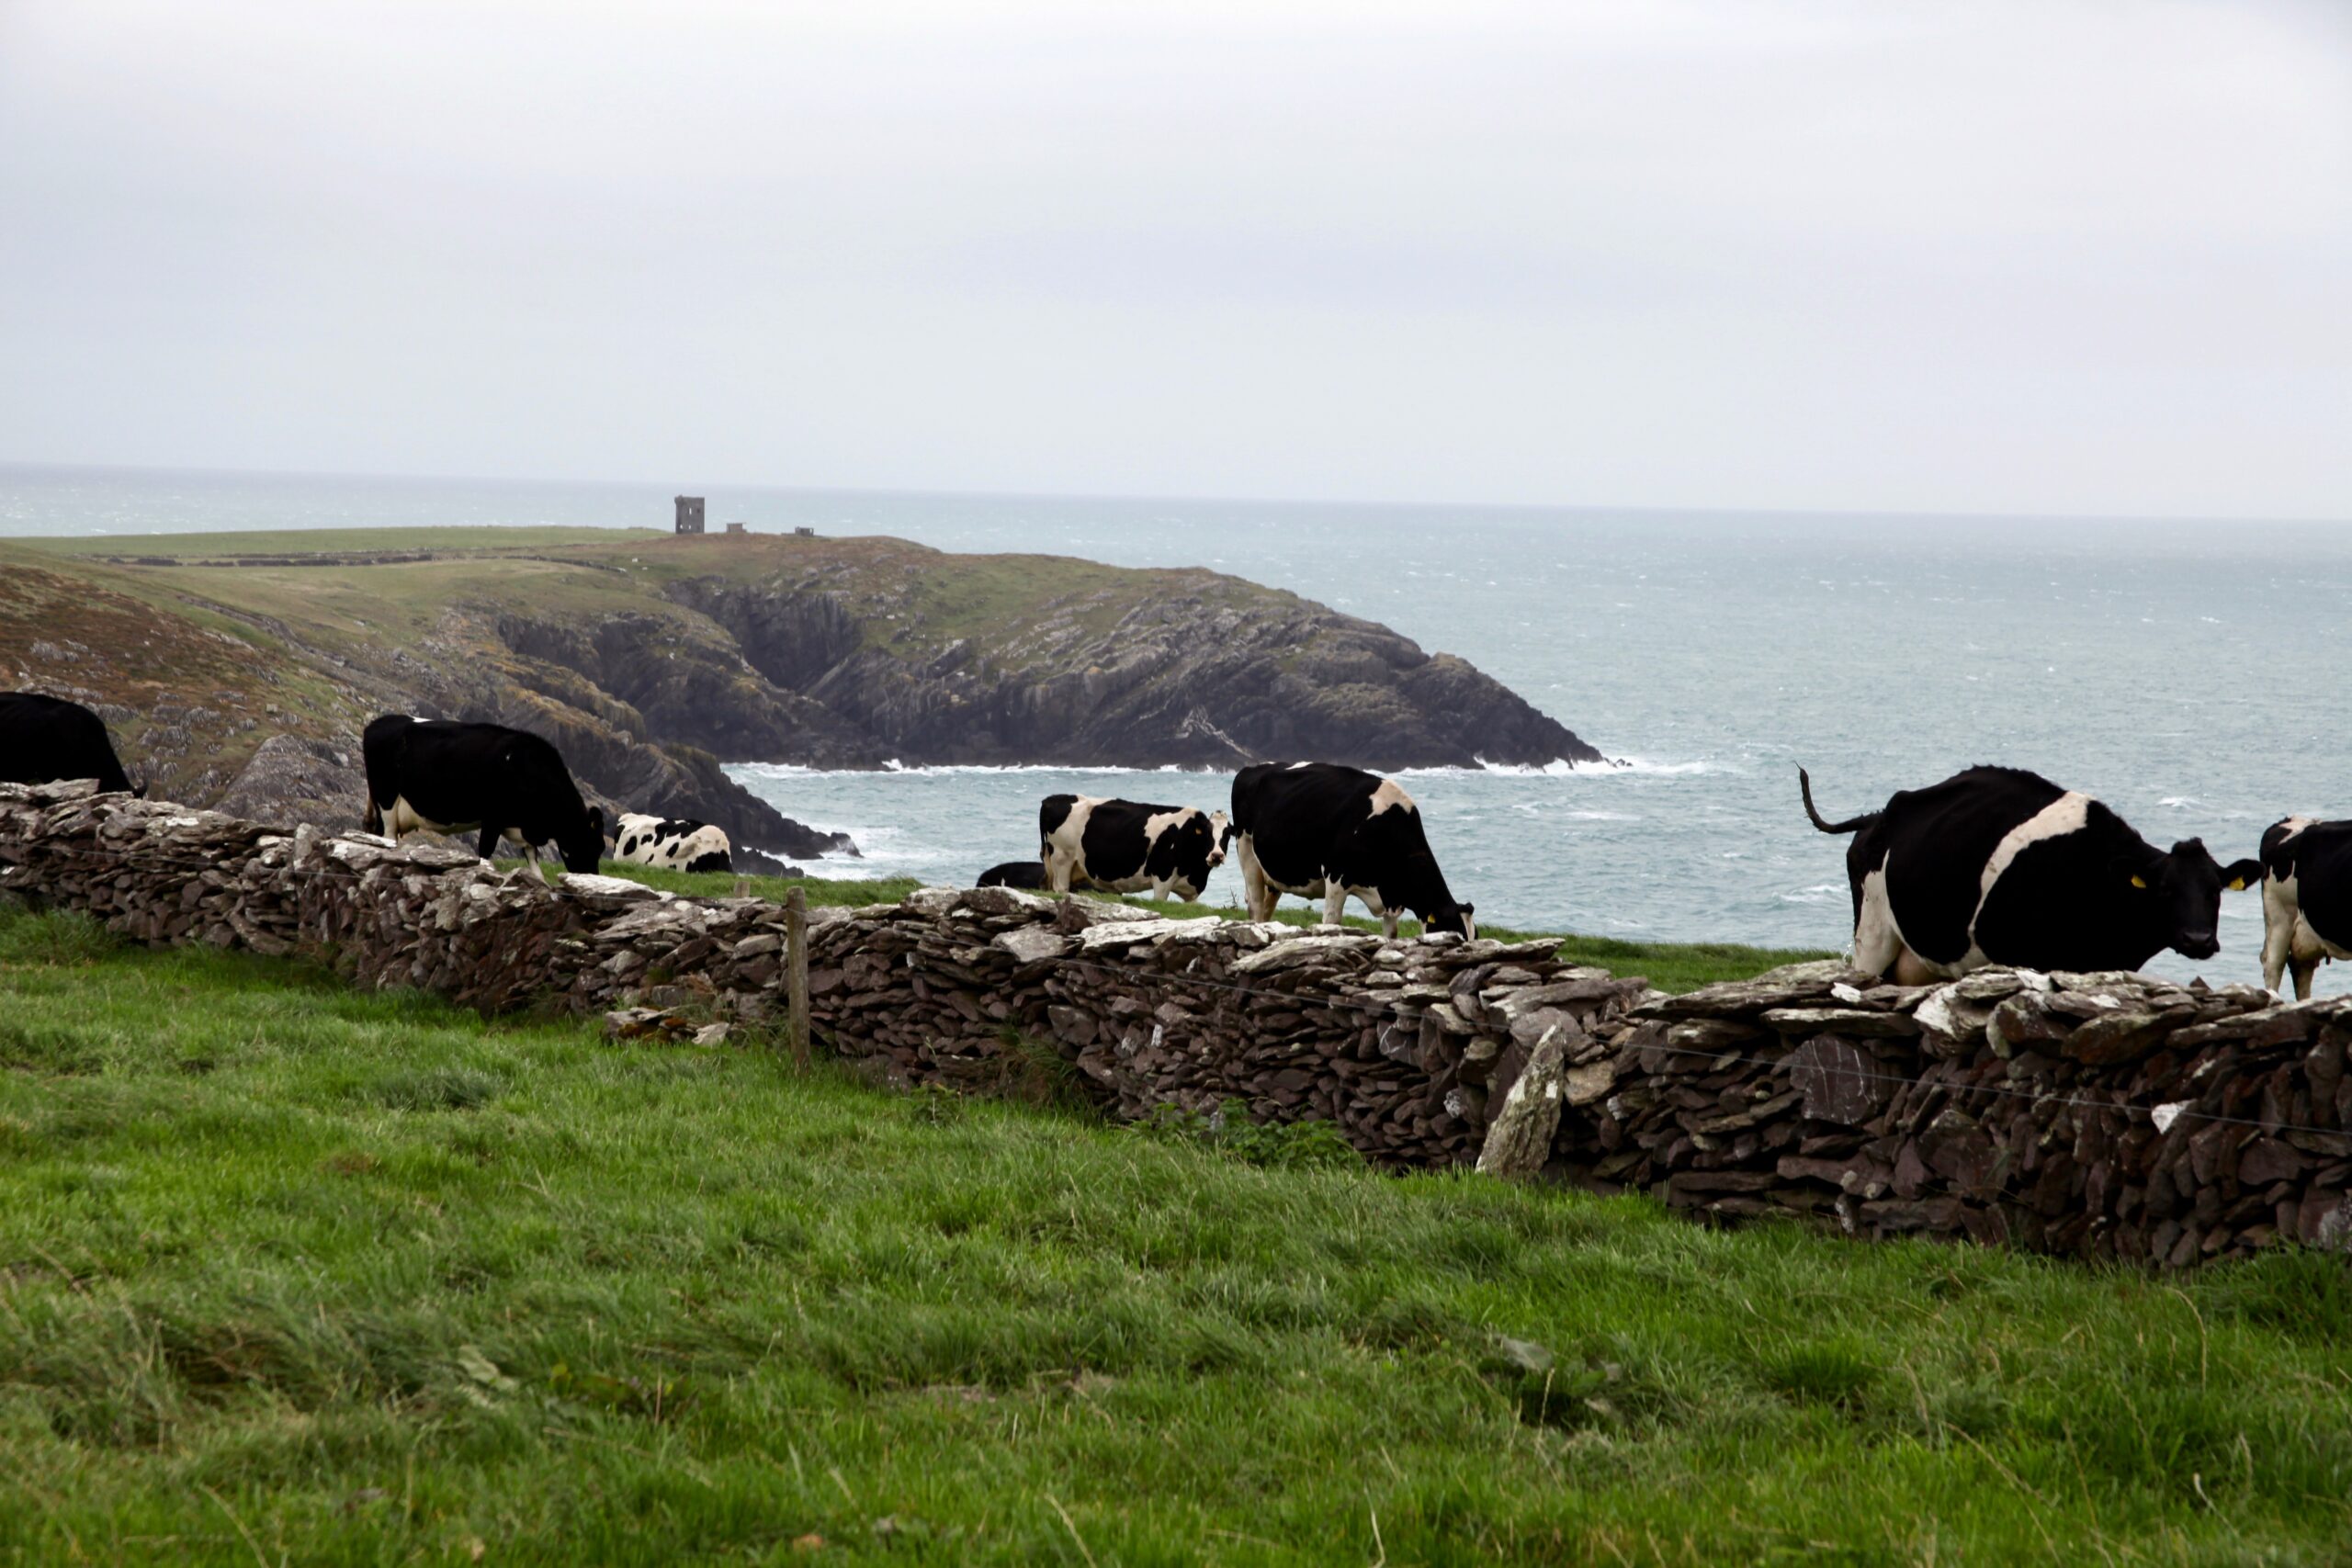 Cows grazing in county of Cork